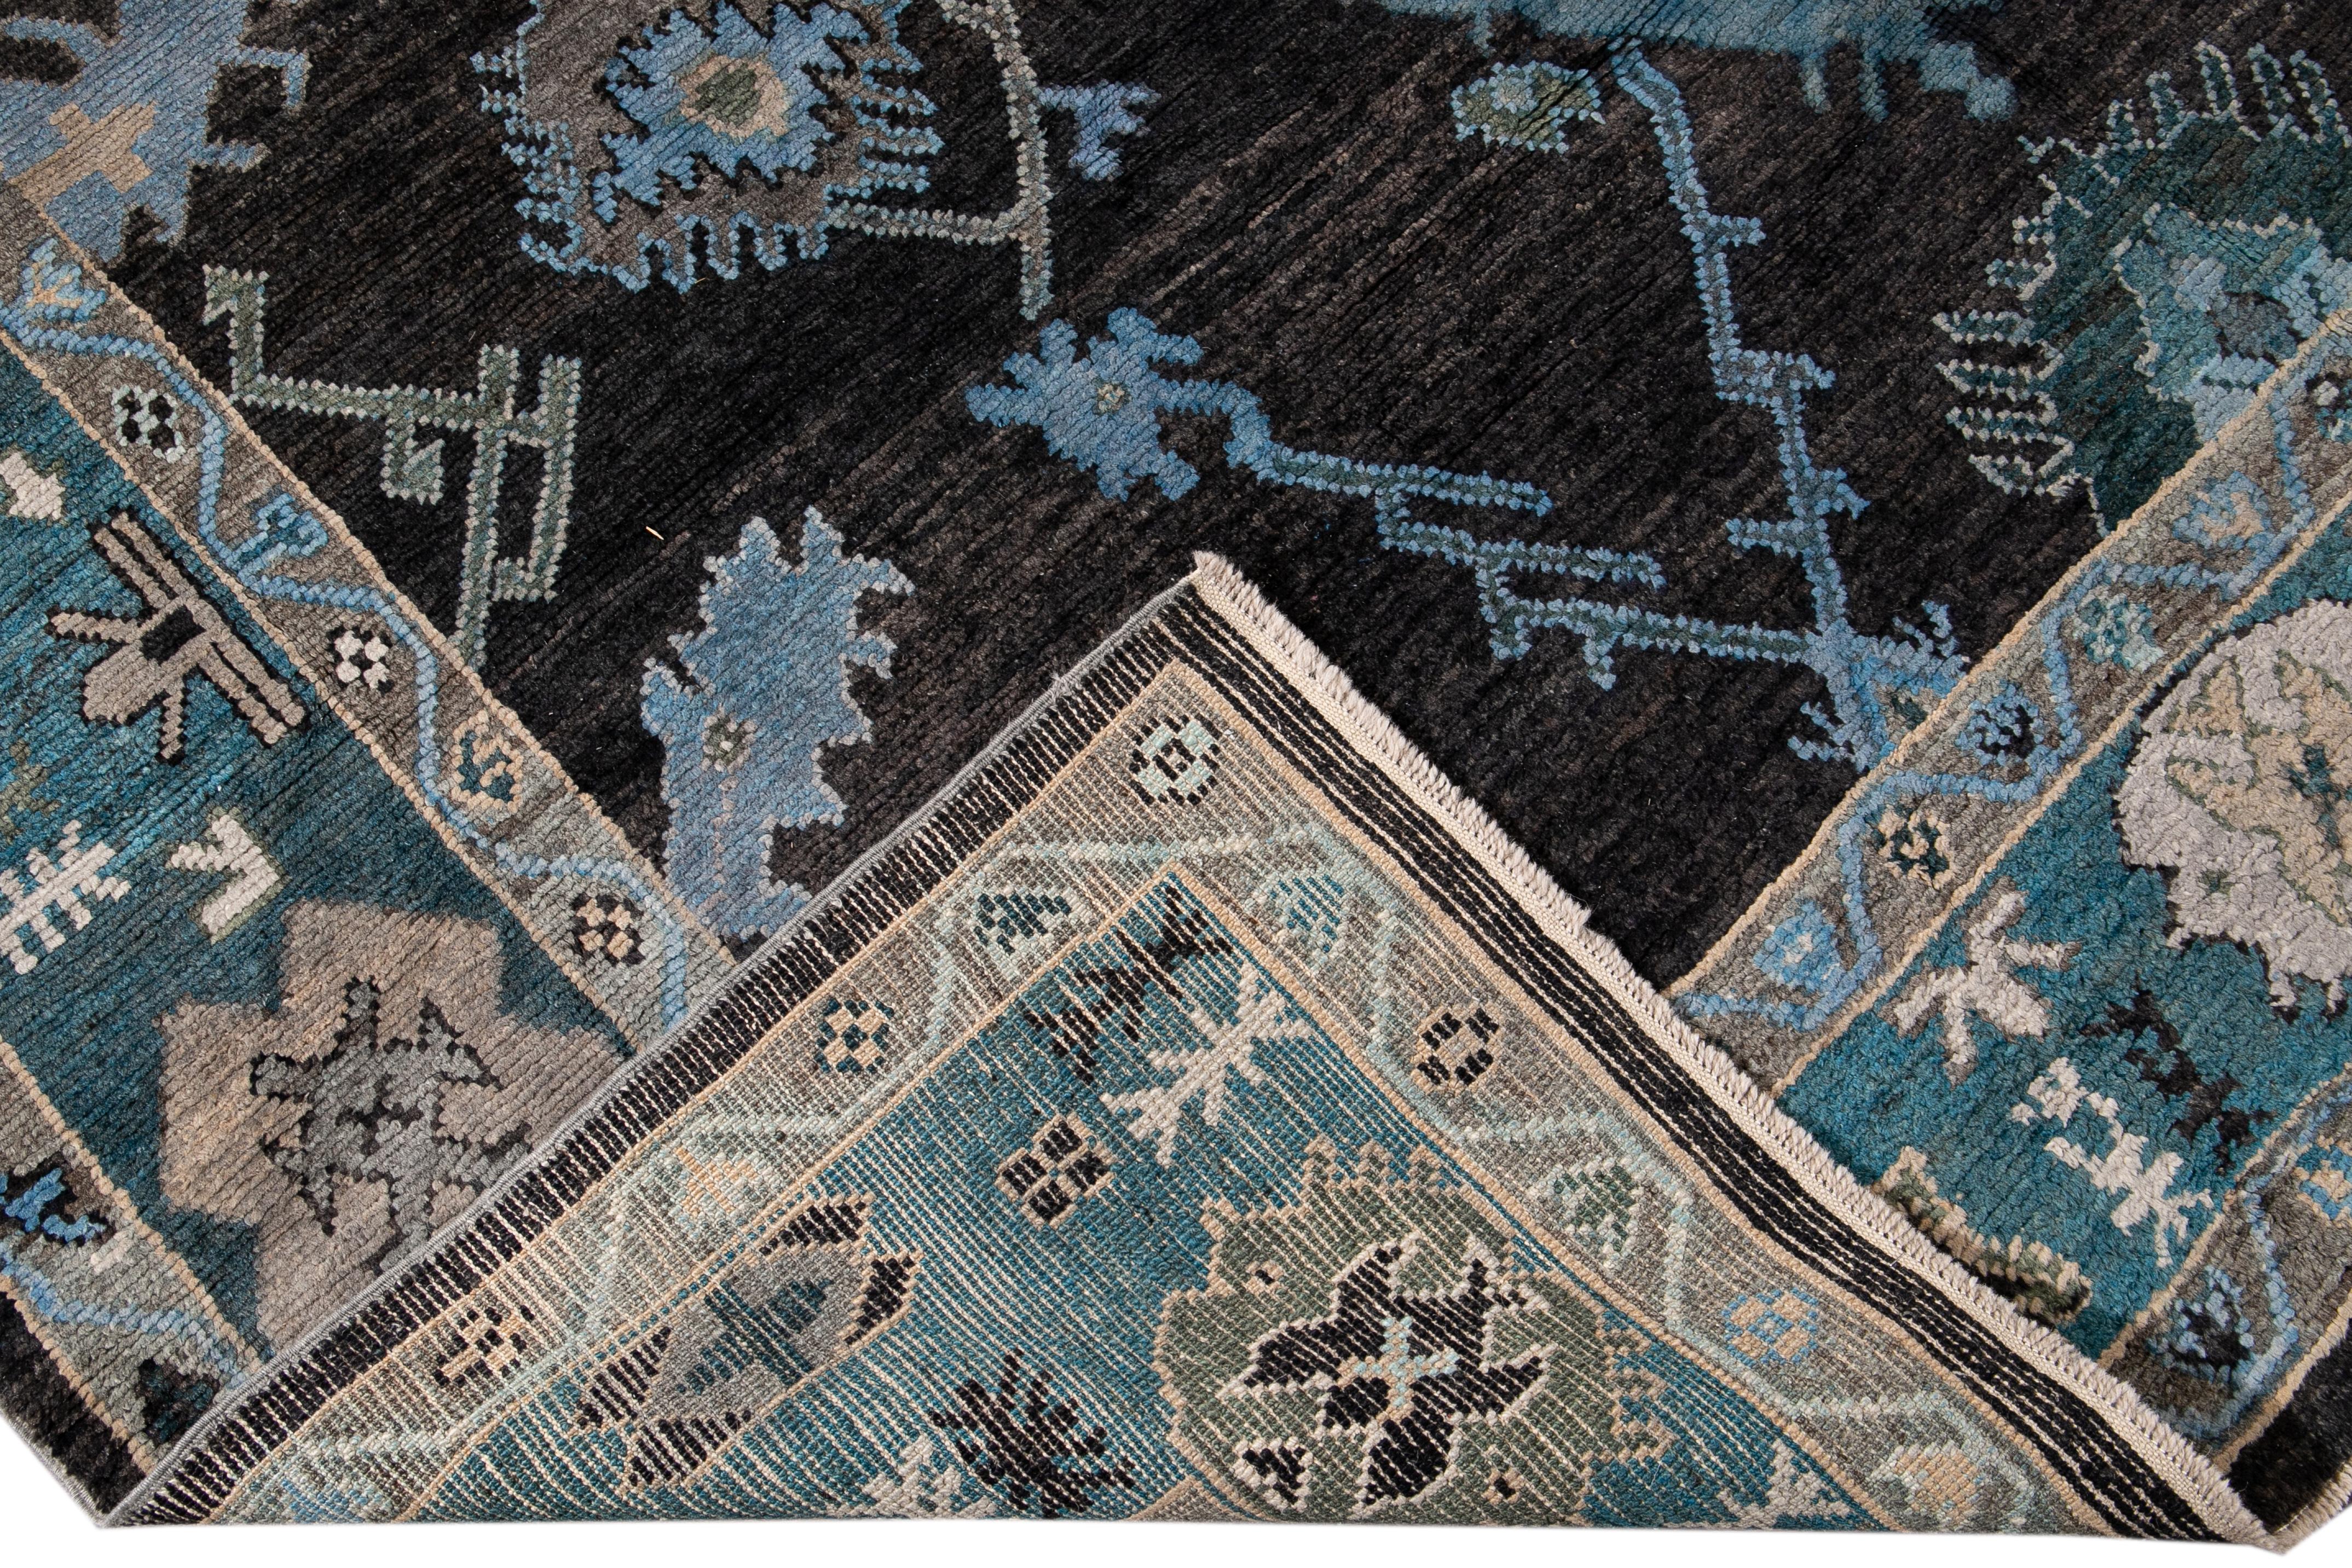 Beautiful modern Oushak hand knotted wool rug with a black field. This Oushak rug has a blue frame and accents of tan, green, and ivory all over a gorgeous geometric floral design.

This rug measures: 9'11